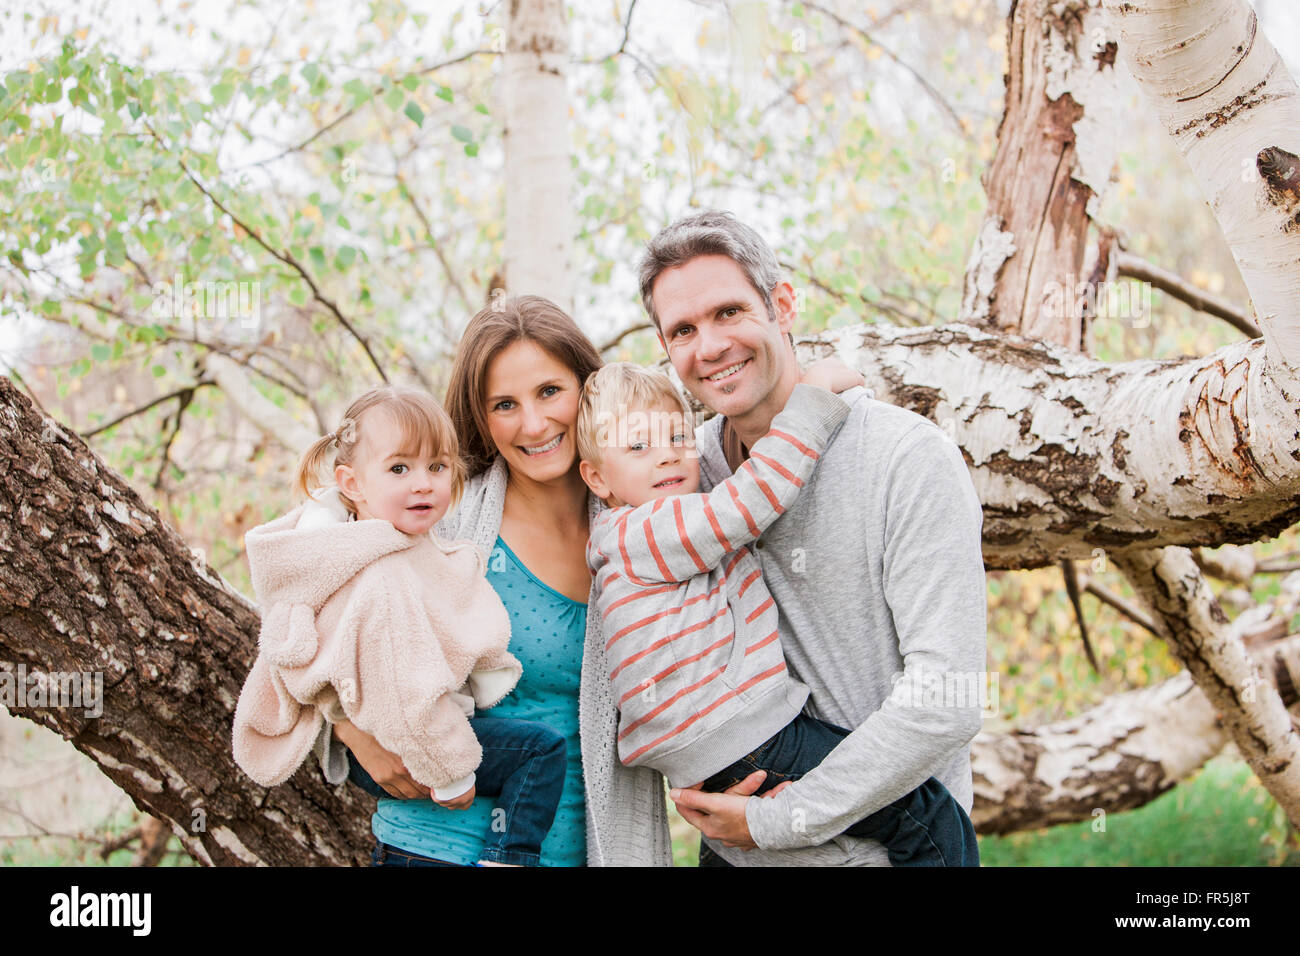 Portrait smiling family in front of tree Stock Photo